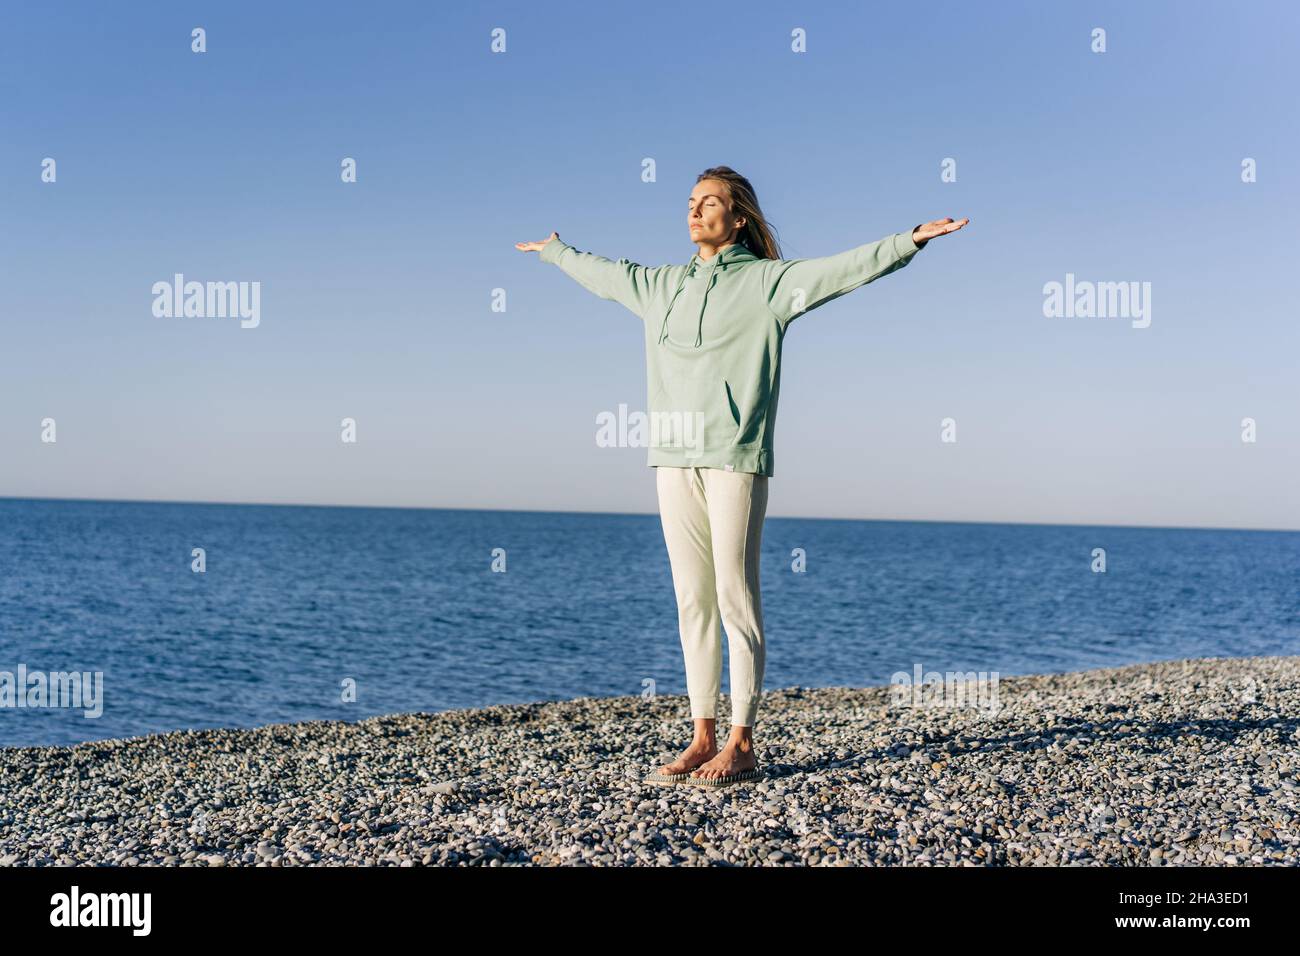 Woman doing energy yoga practice by the sea while standing on boards with nails. Stock Photo